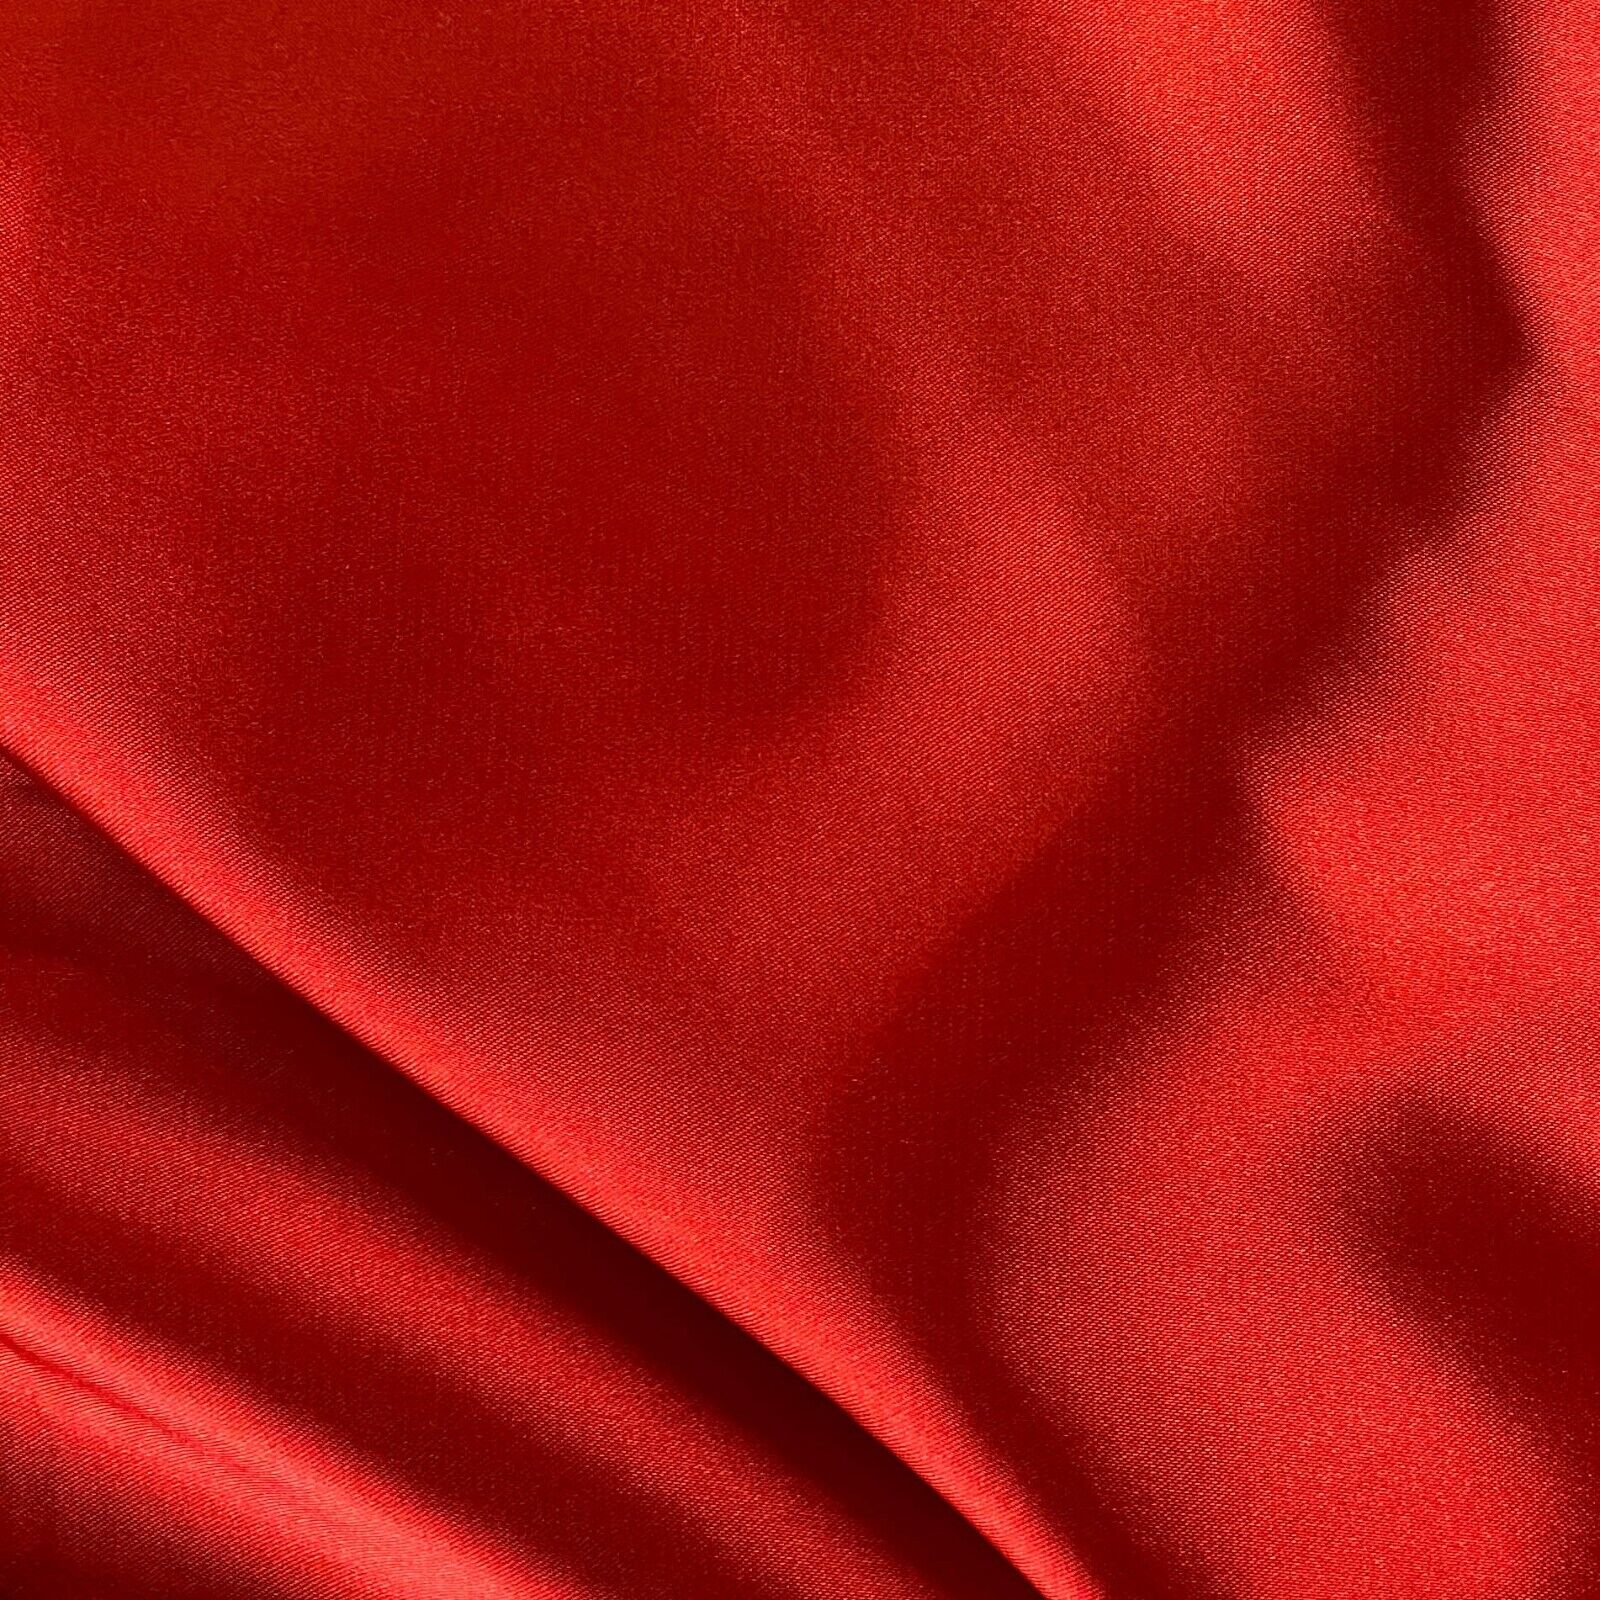 Satin: The Fabric of Luxury and Elegance插图2